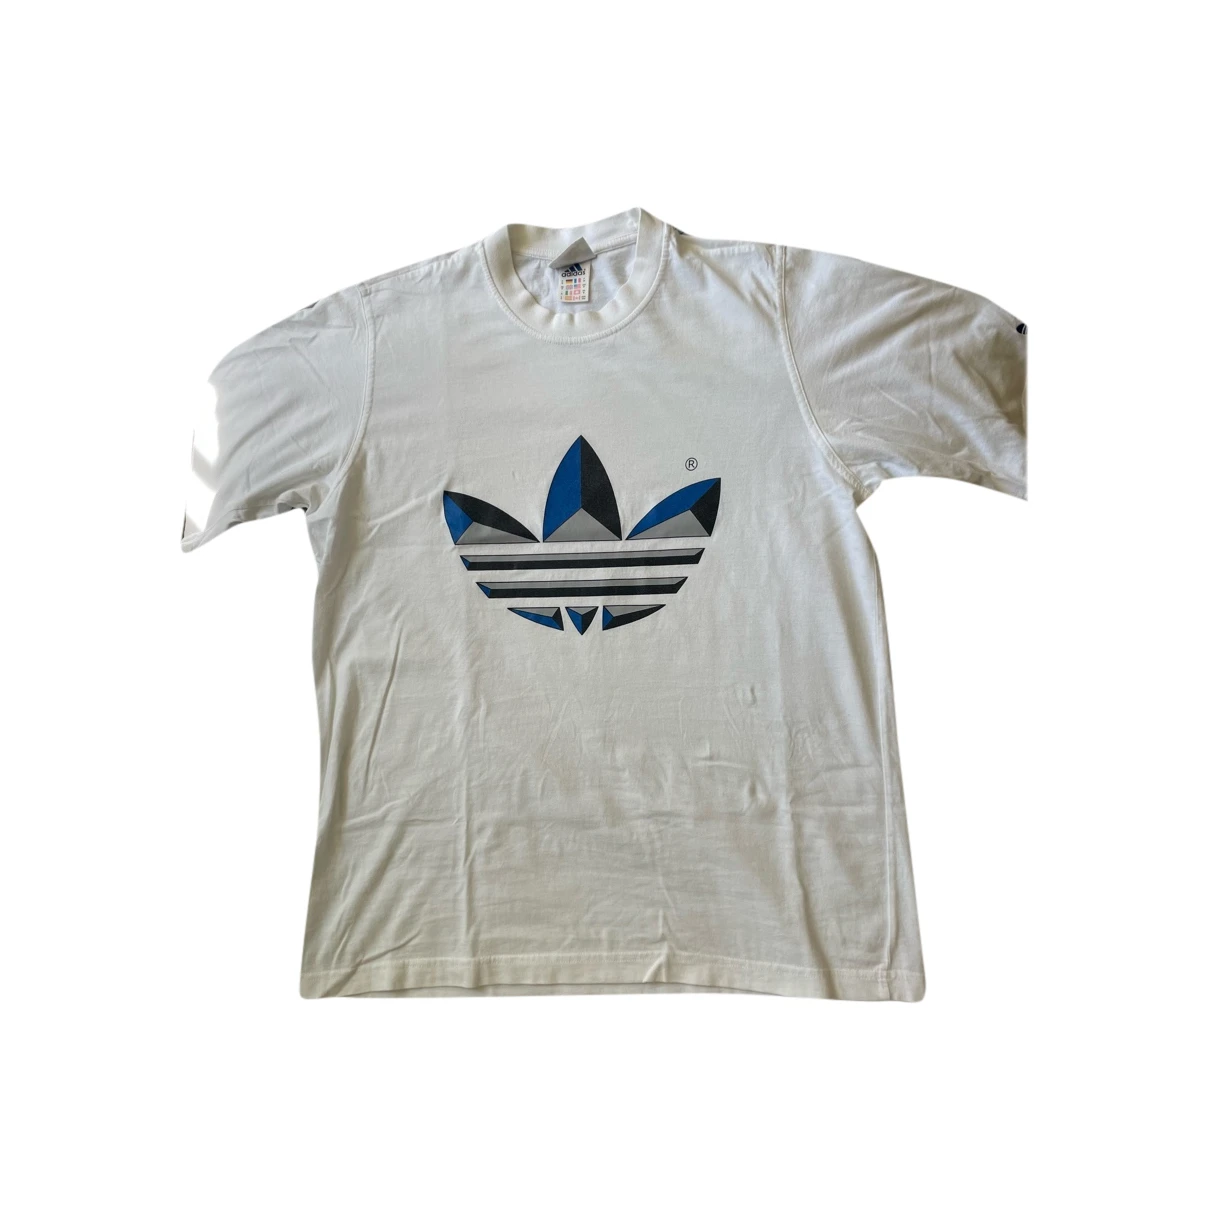 Pre-owned Adidas Originals Dress In White